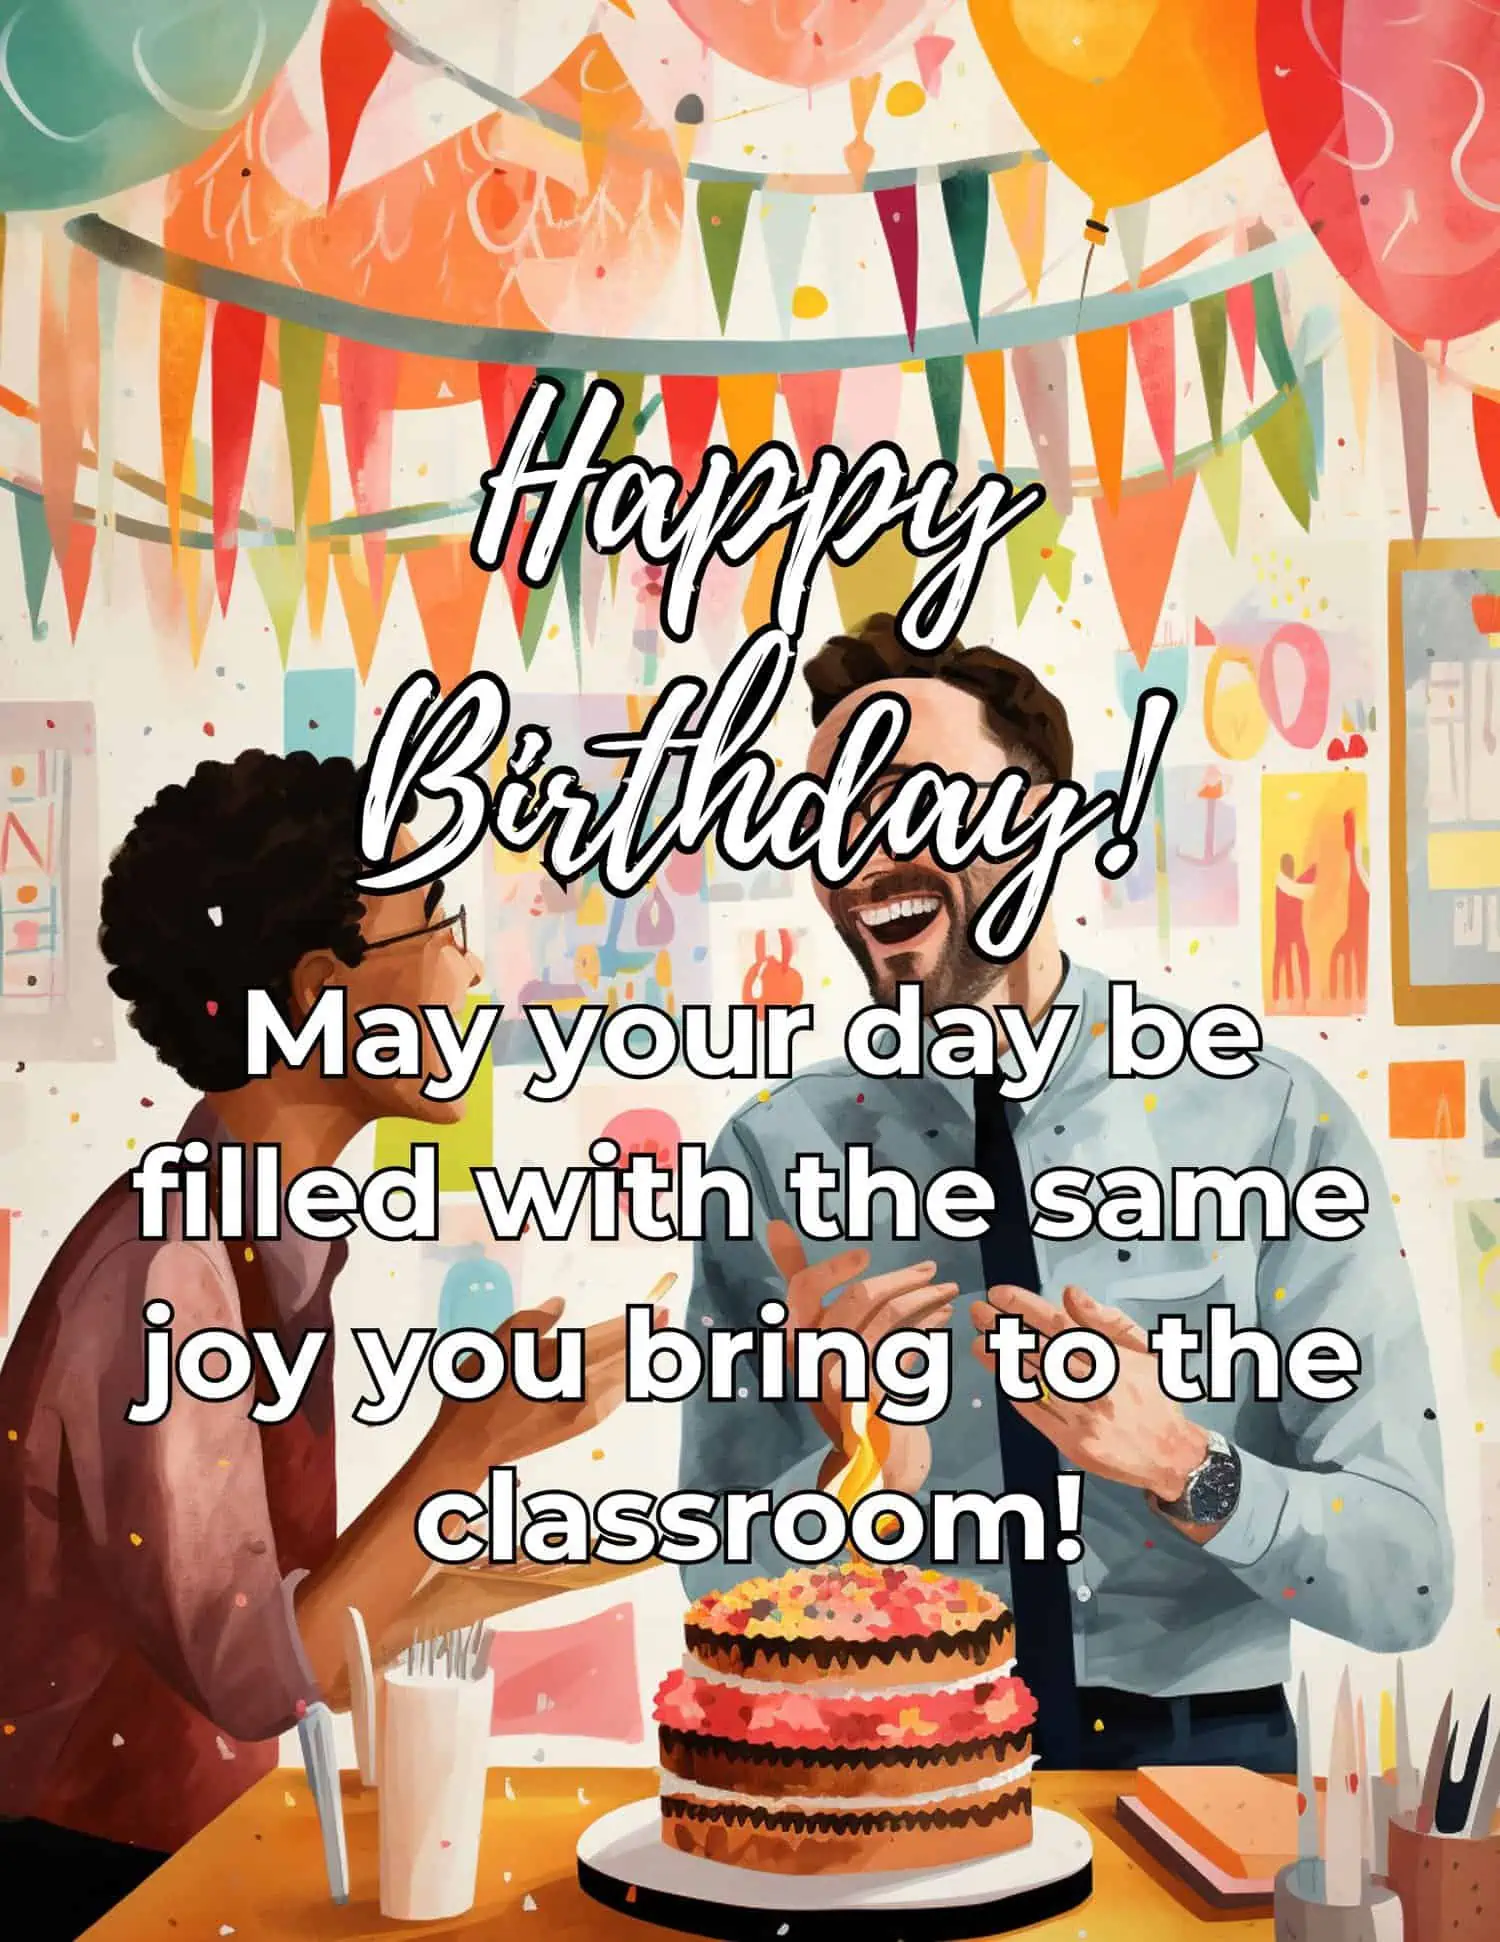 A collection of warm and heartfelt birthday messages designed especially for educators sharing camaraderie and the passion of teaching.